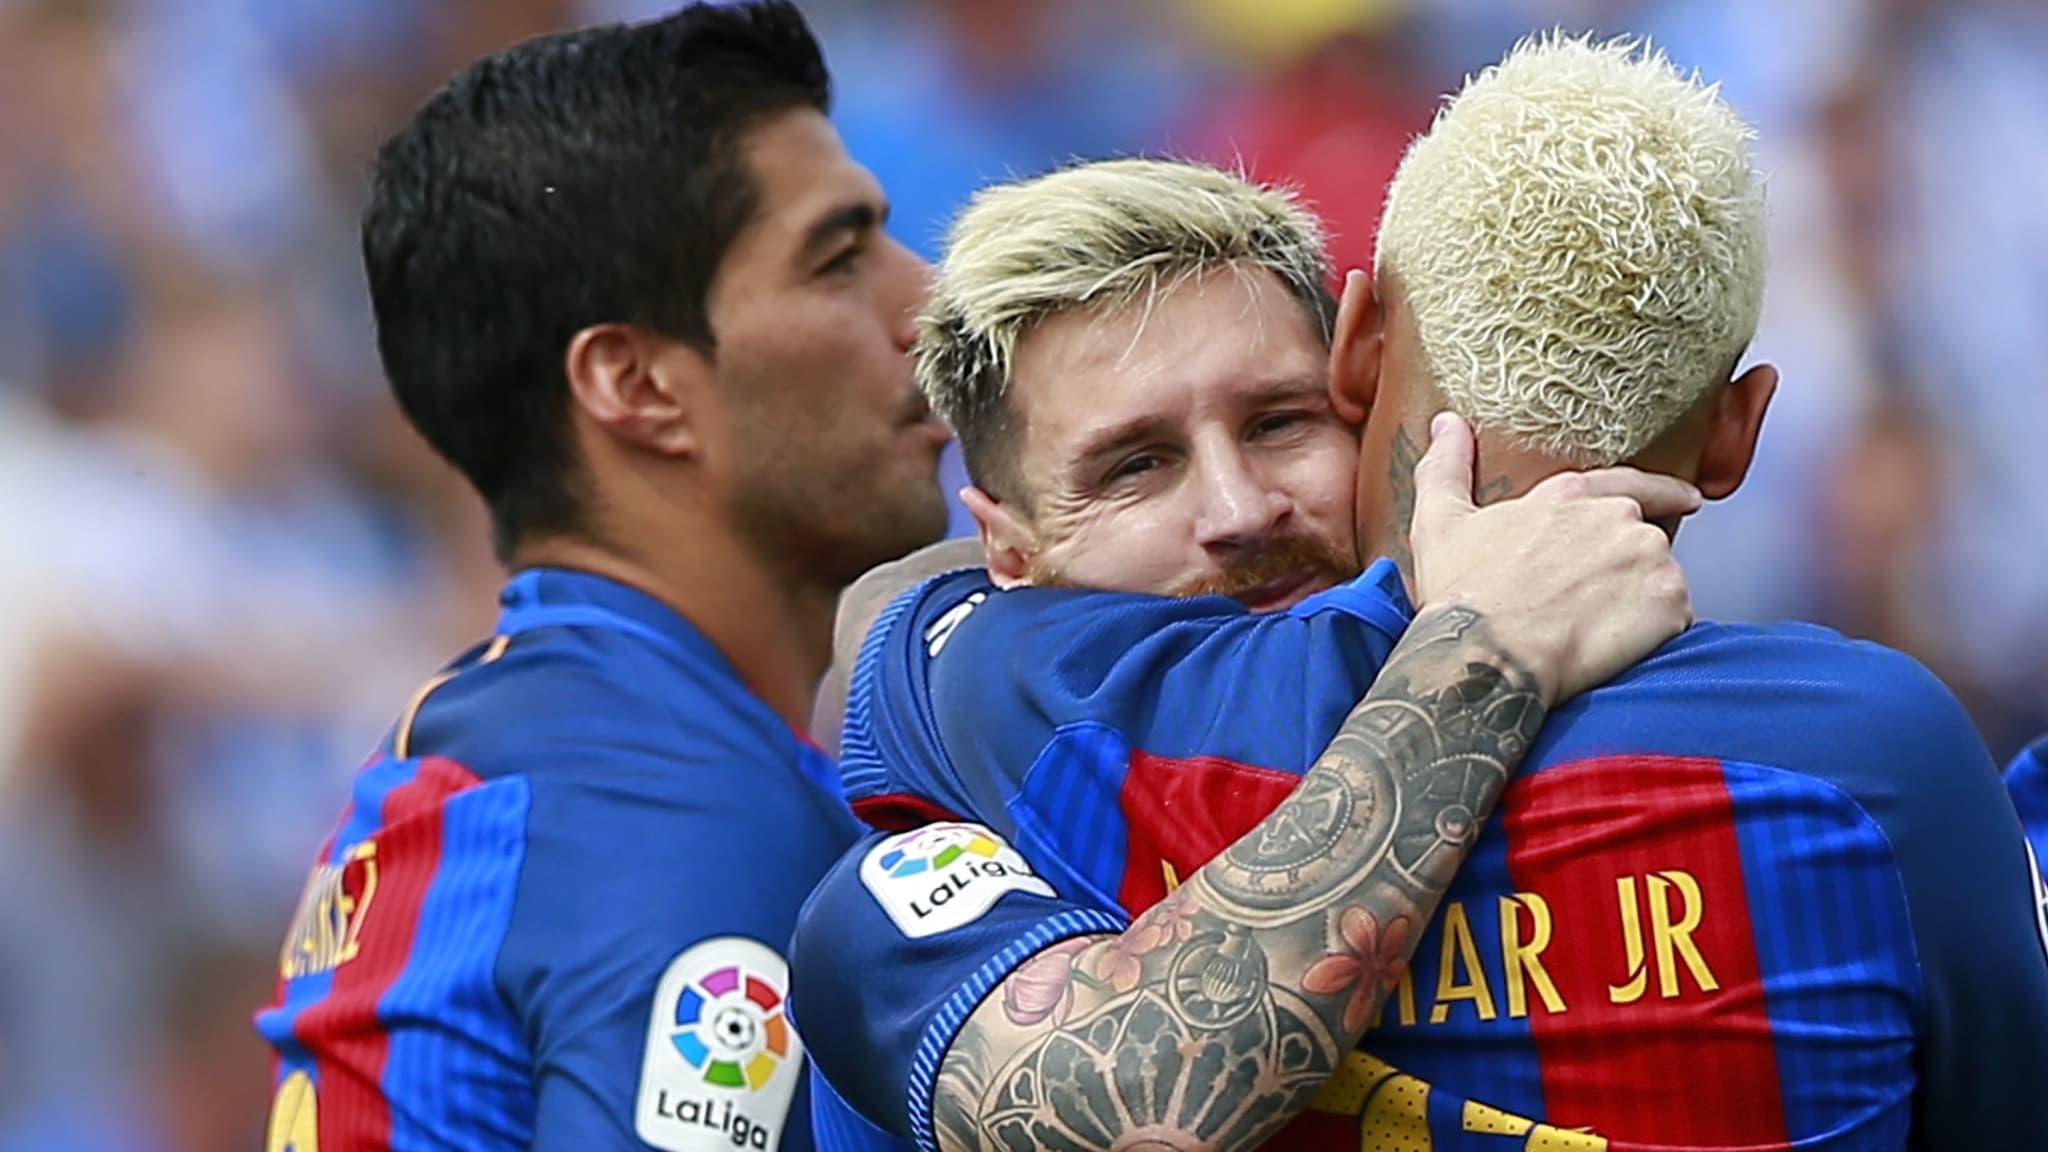 The Best FIFA Football Awards™: The MSN trio are the world's top three players